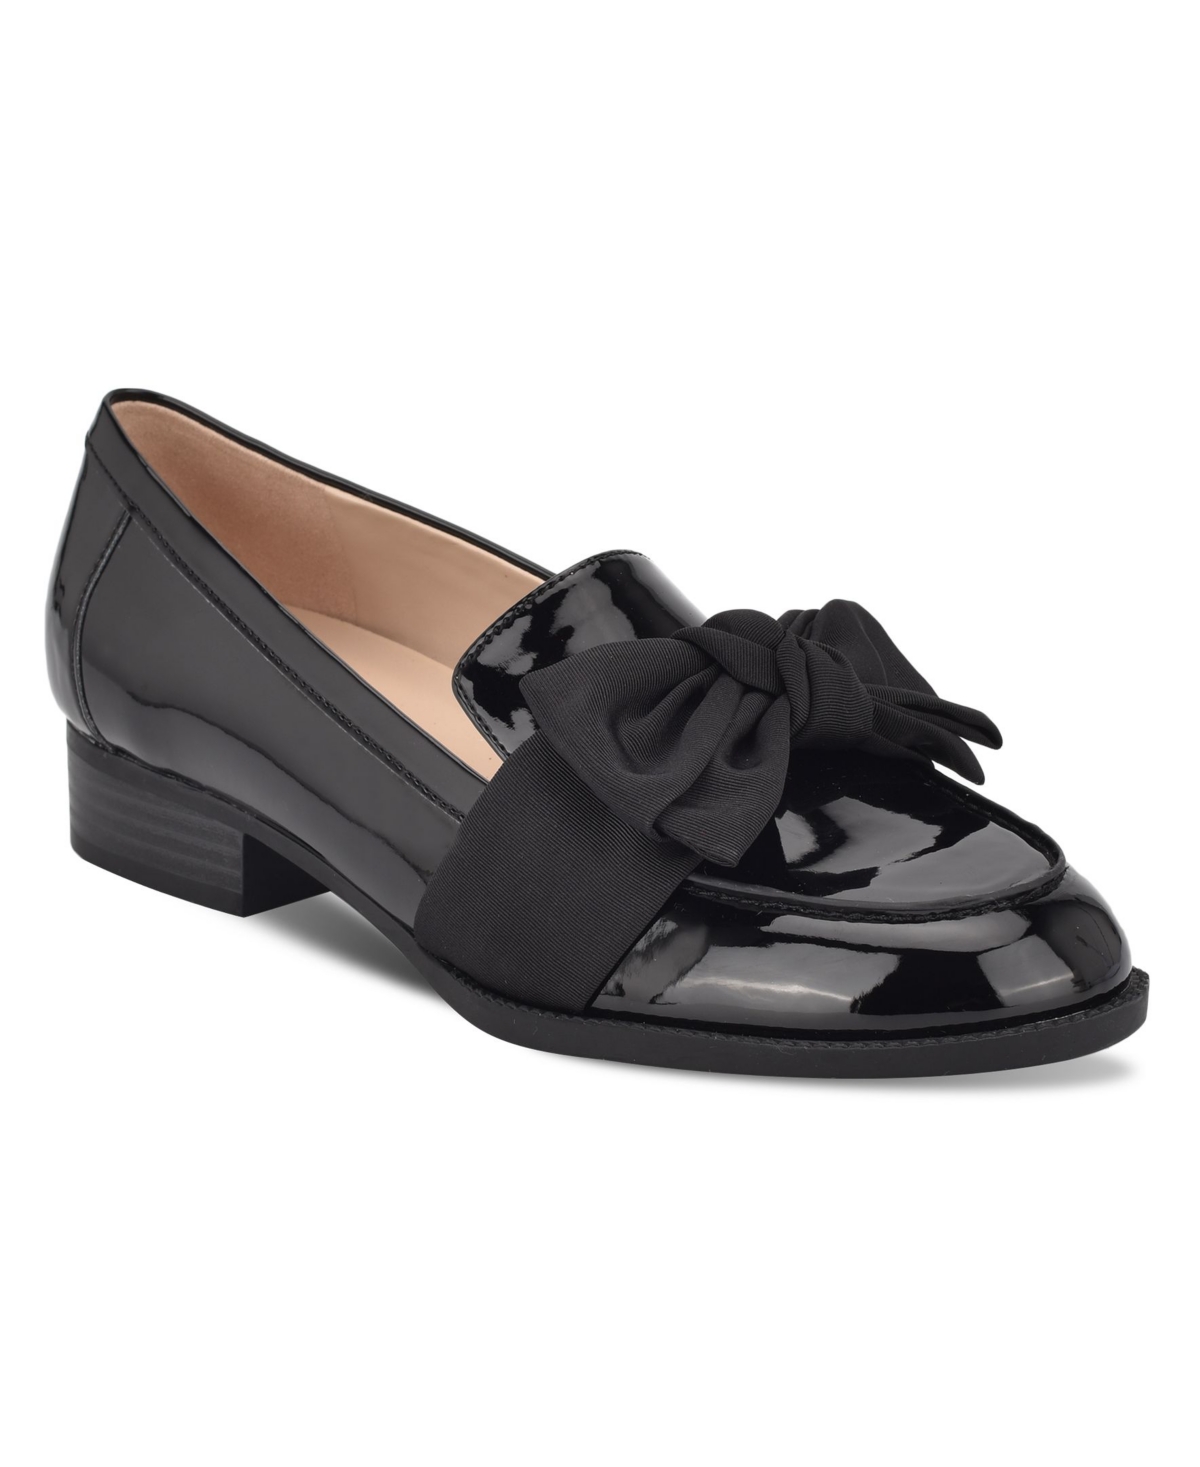 Women's Lindio Bow Detail Block Heel Slip On Loafers - Navy Patent - Faux Patent Leather, Texti